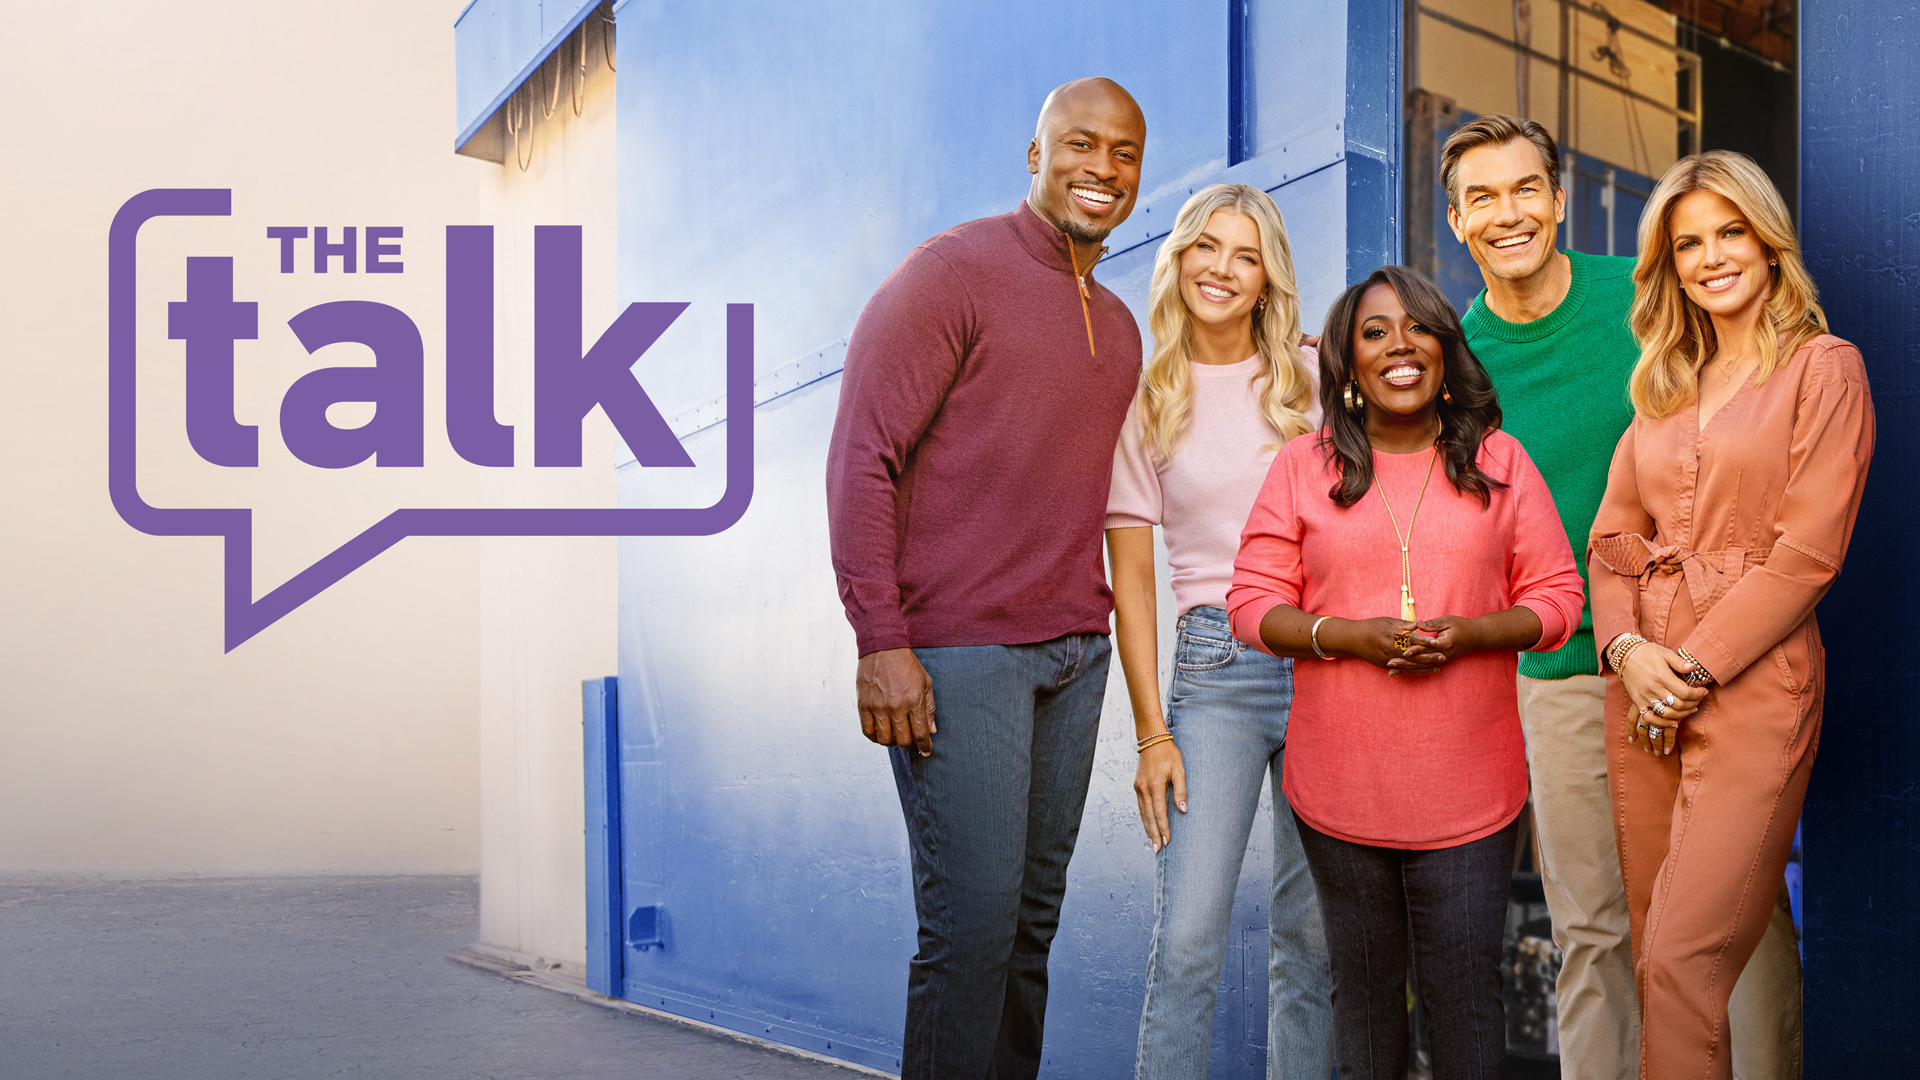 CBS The Talk Web Exclusive Giveaway Sweepstakes